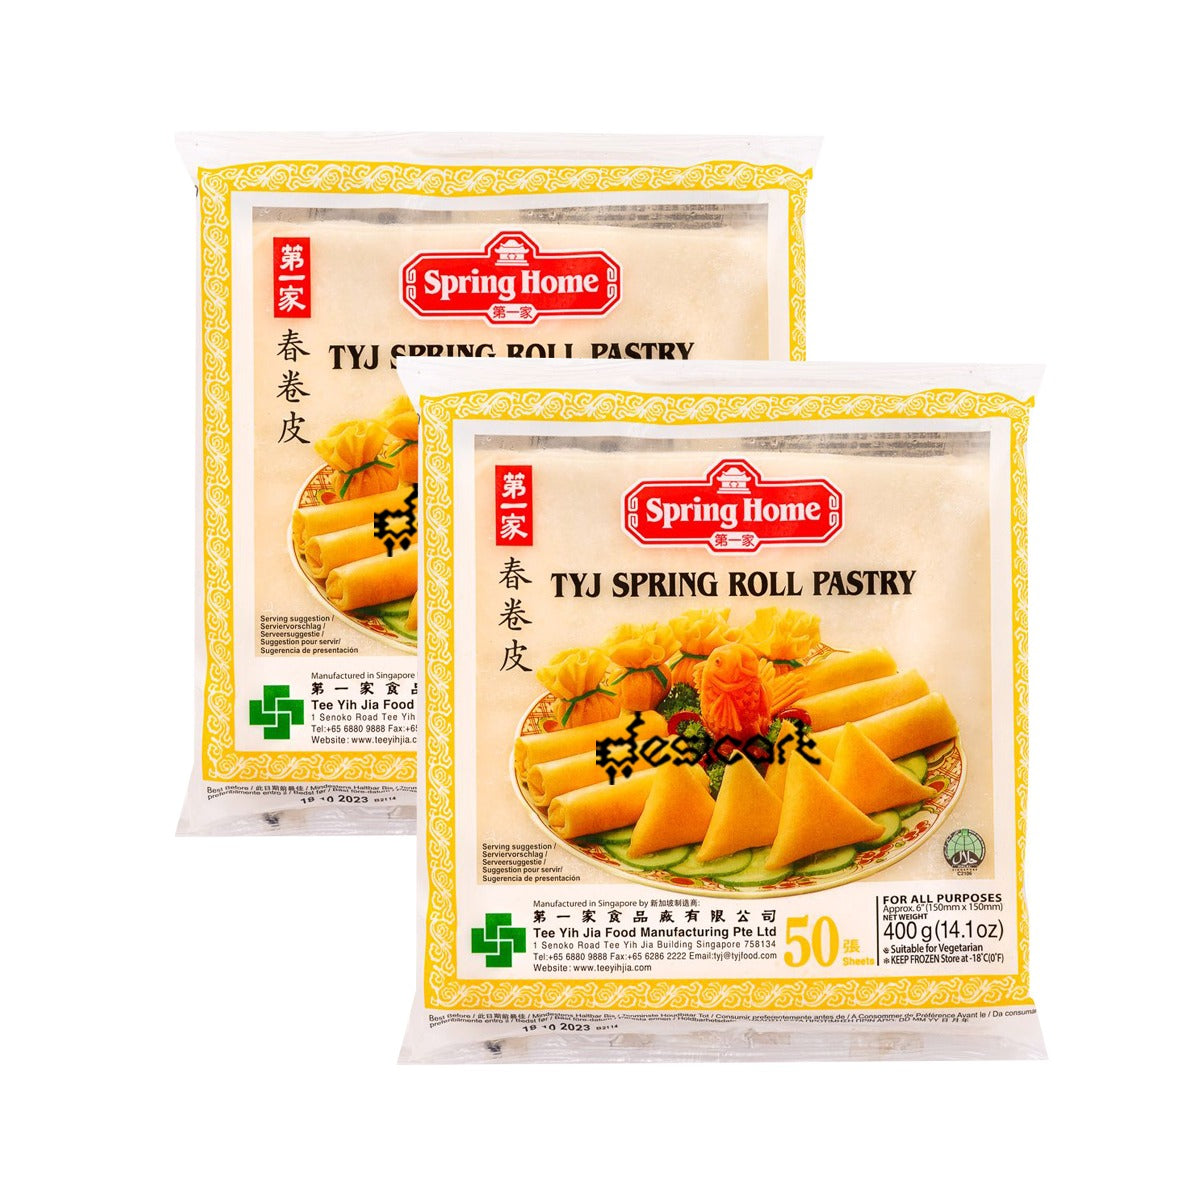 SPRING HOME TYJ SPRING ROLL PASTRY 6" 400G (PACK OF 2)